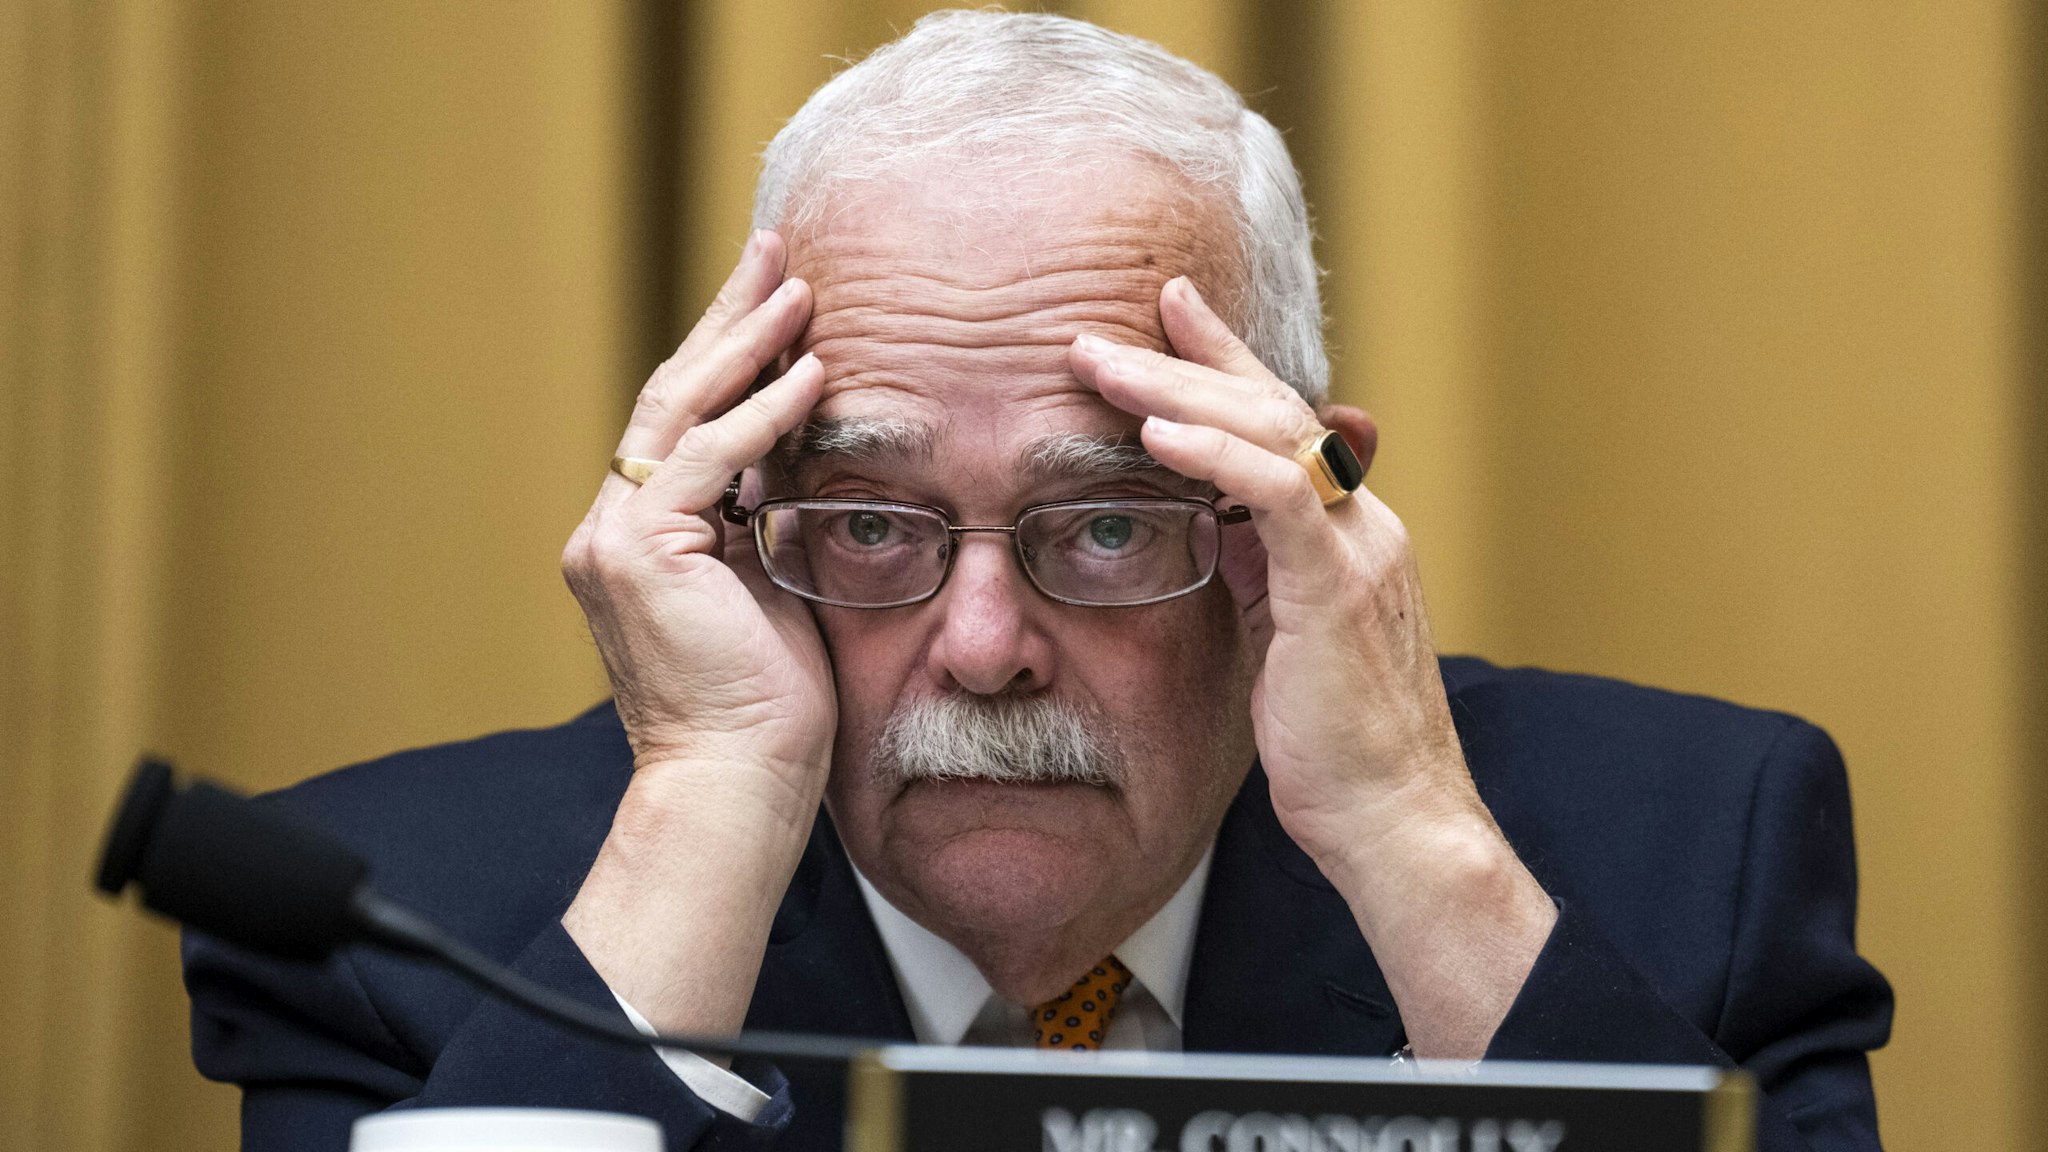 UNITED STATES - MARCH 30: Rep. Gerry Connolly, D-Va., attends the House Judiciary Select Subcommittee on the Weaponization of the Federal Government hearing on the Missouri v. Biden case challenging the administrations violation of the First Amendment by directing social media companies to censor and suppress Americans' free speech, in Rayburn Building on Thursday, March 30, 2023.